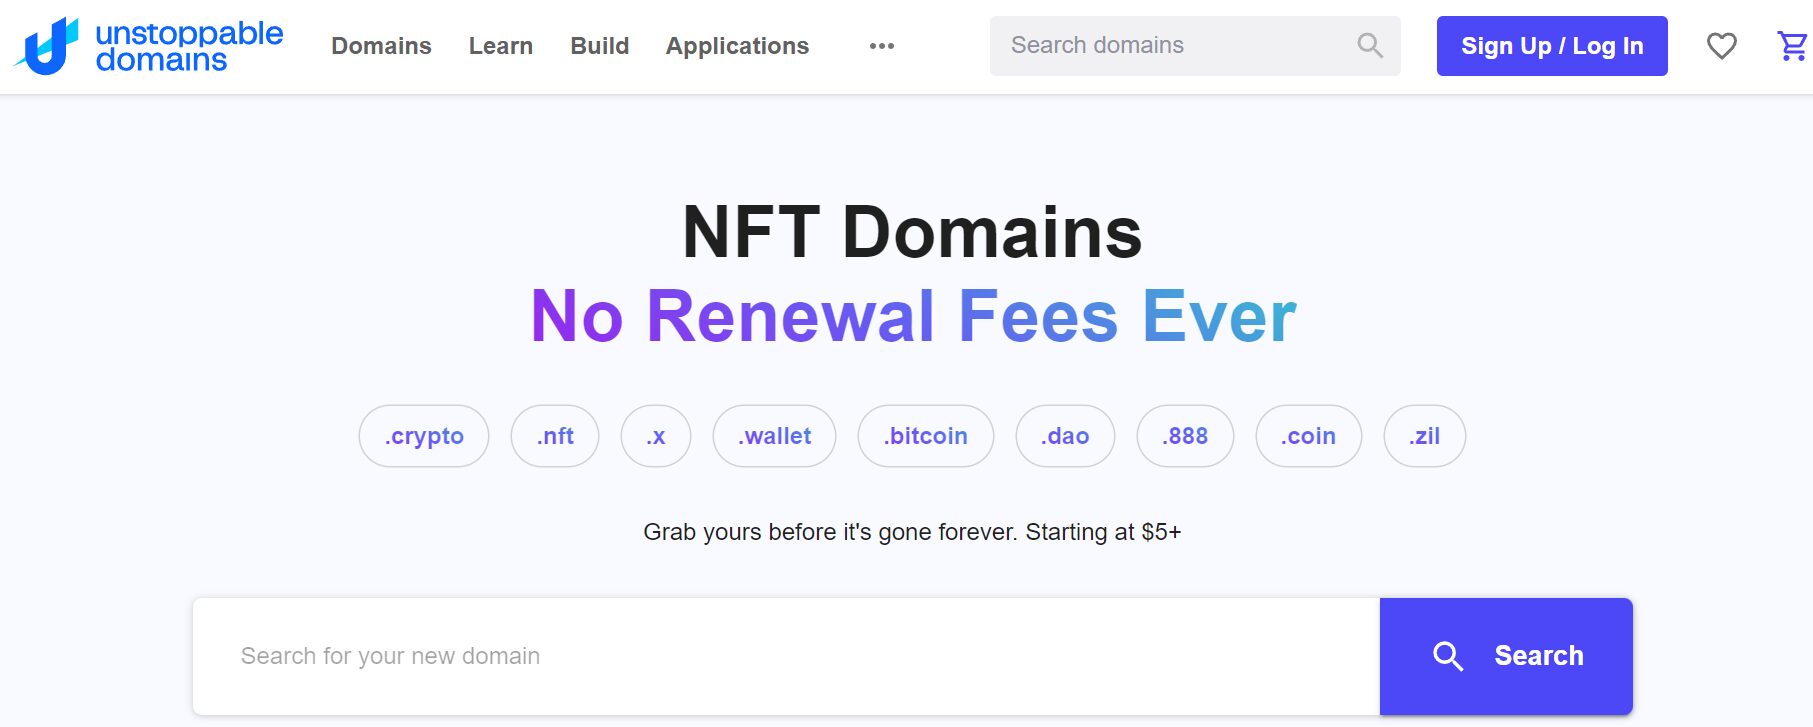 Unstoppable Domains sells NFT domains. 